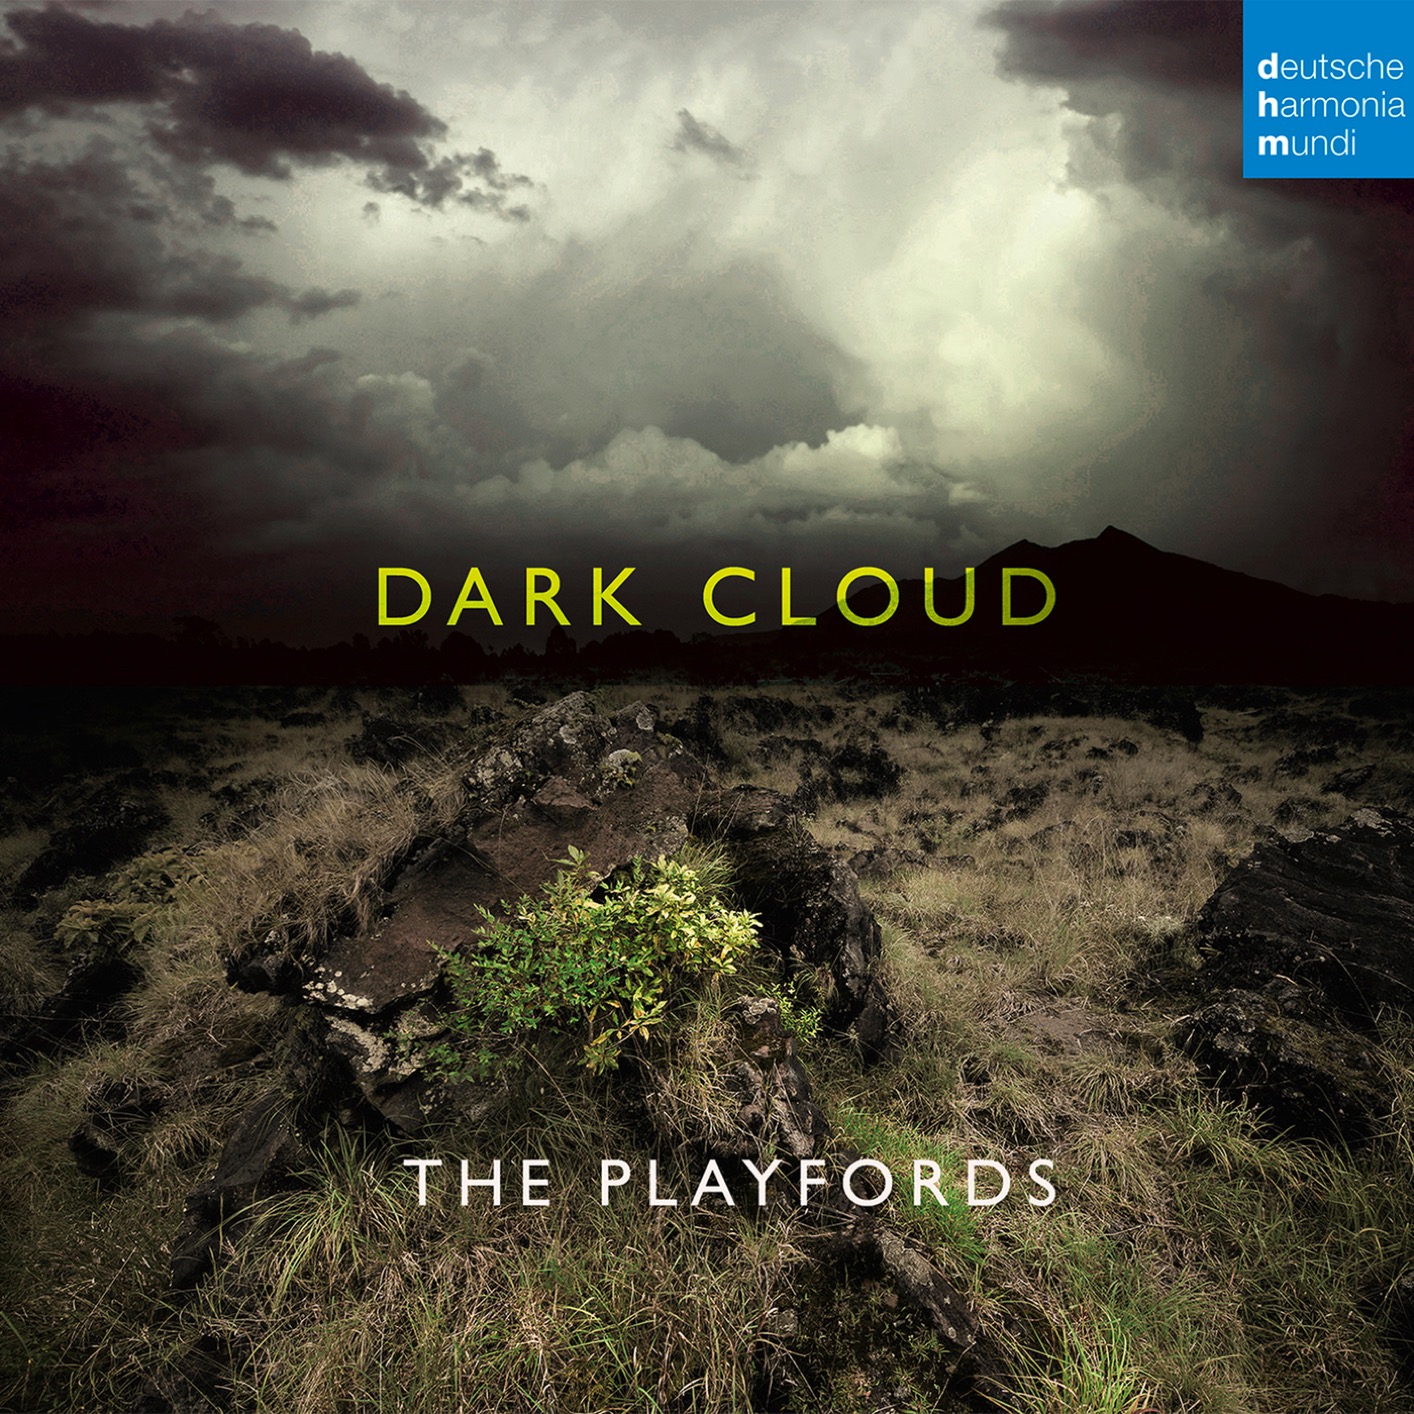 The Playfords - Dark Cloud: Songs from the Thirty Years’ War 1618-1648 (2019) [FLAC 24bit/96kHz]